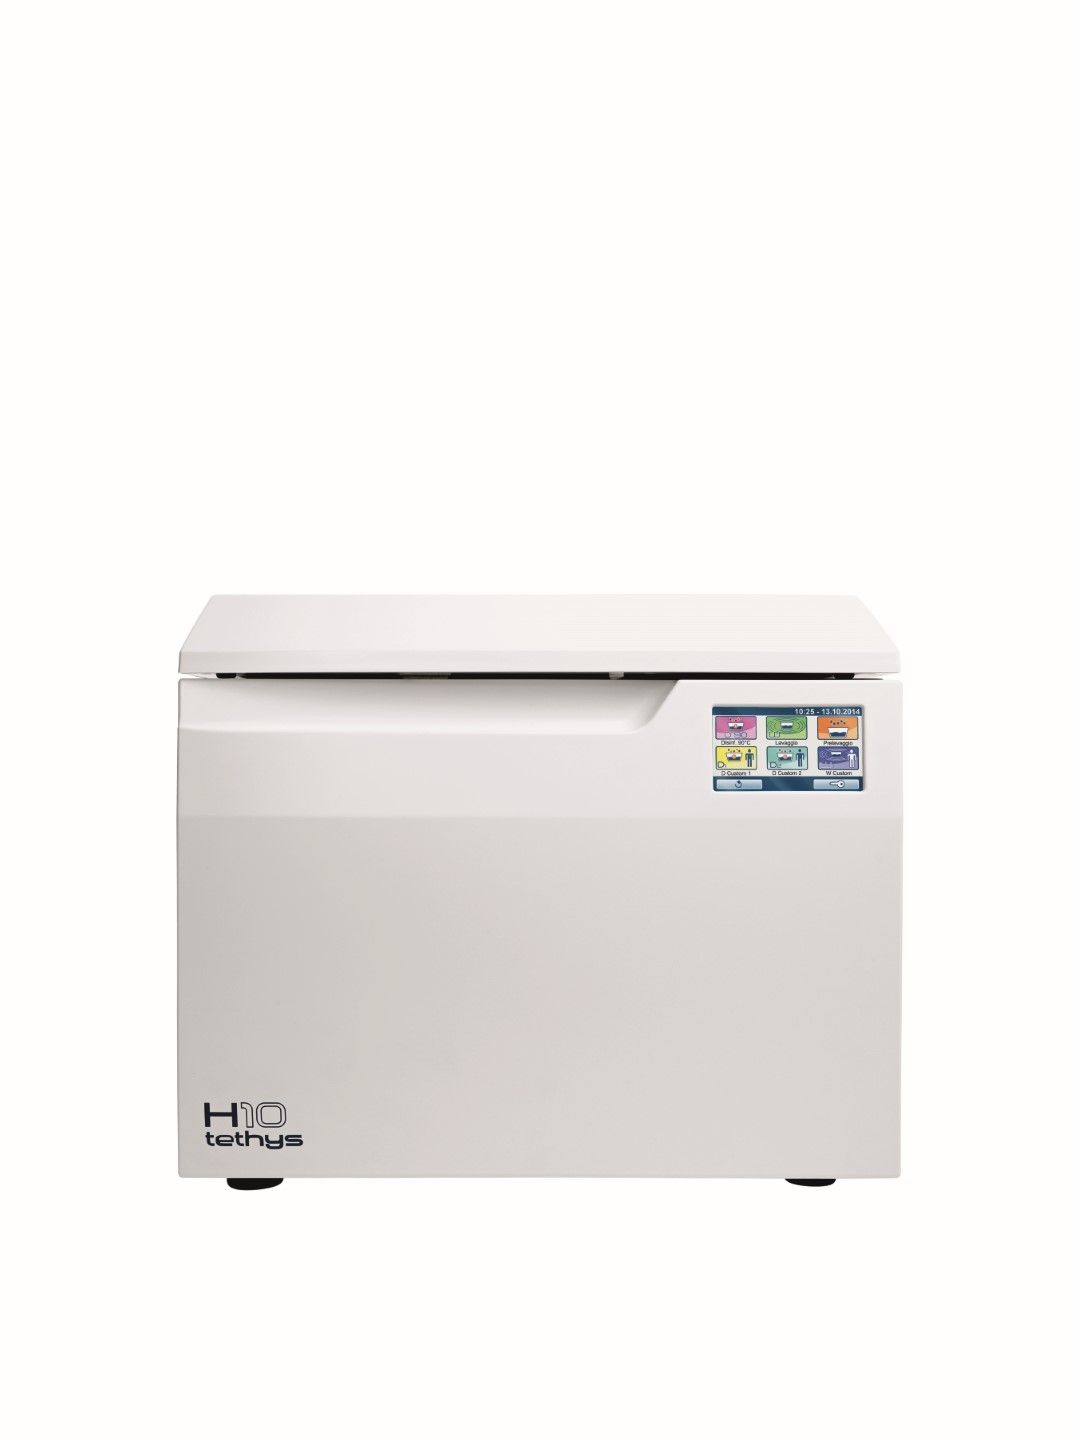 MOCOM TETHYS H10PLUS THERMAL WASHER / DISINFECTOR  photo